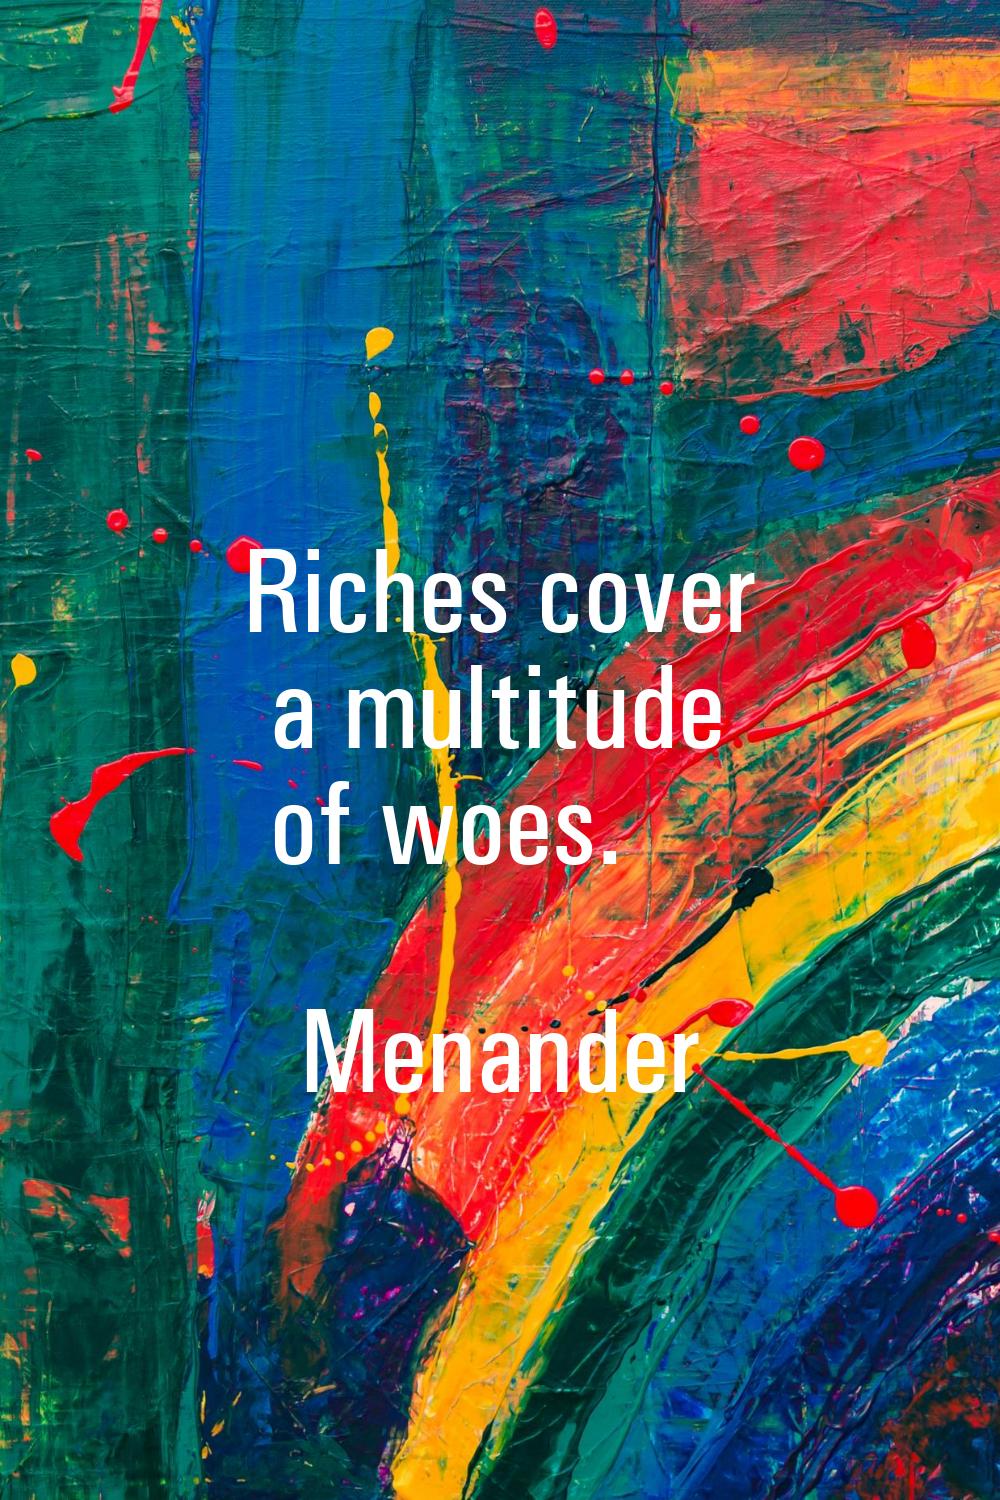 Riches cover a multitude of woes.